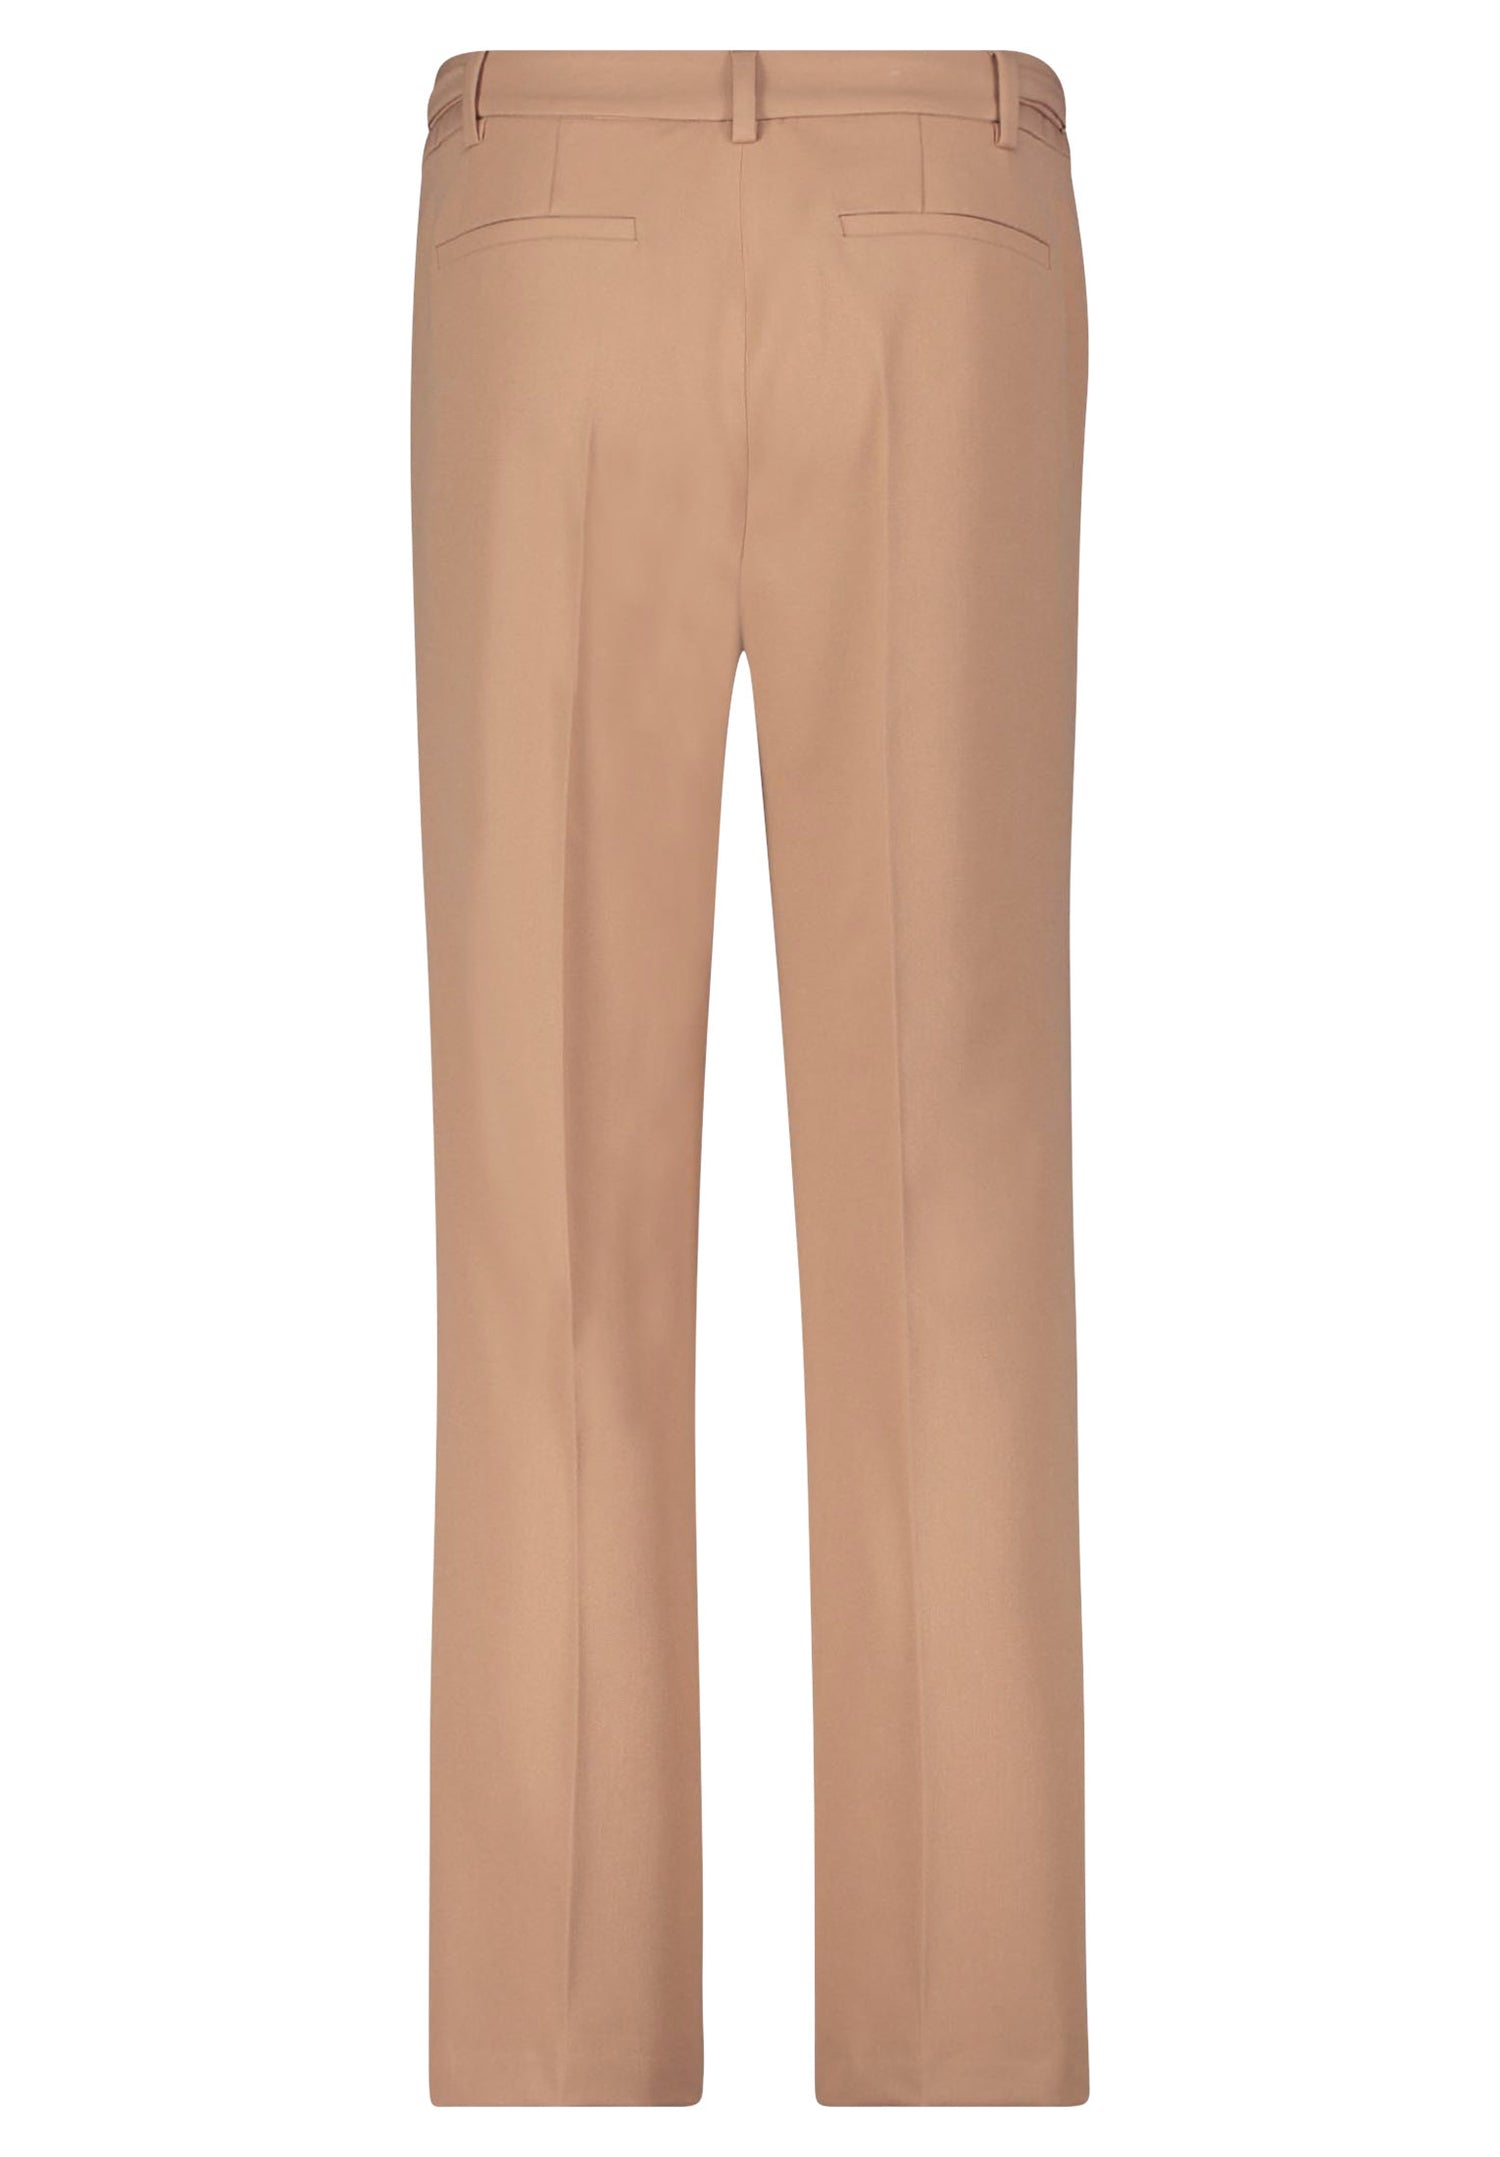 Beige Dress Trousers With Center Pleat_6831-1055_7030_02